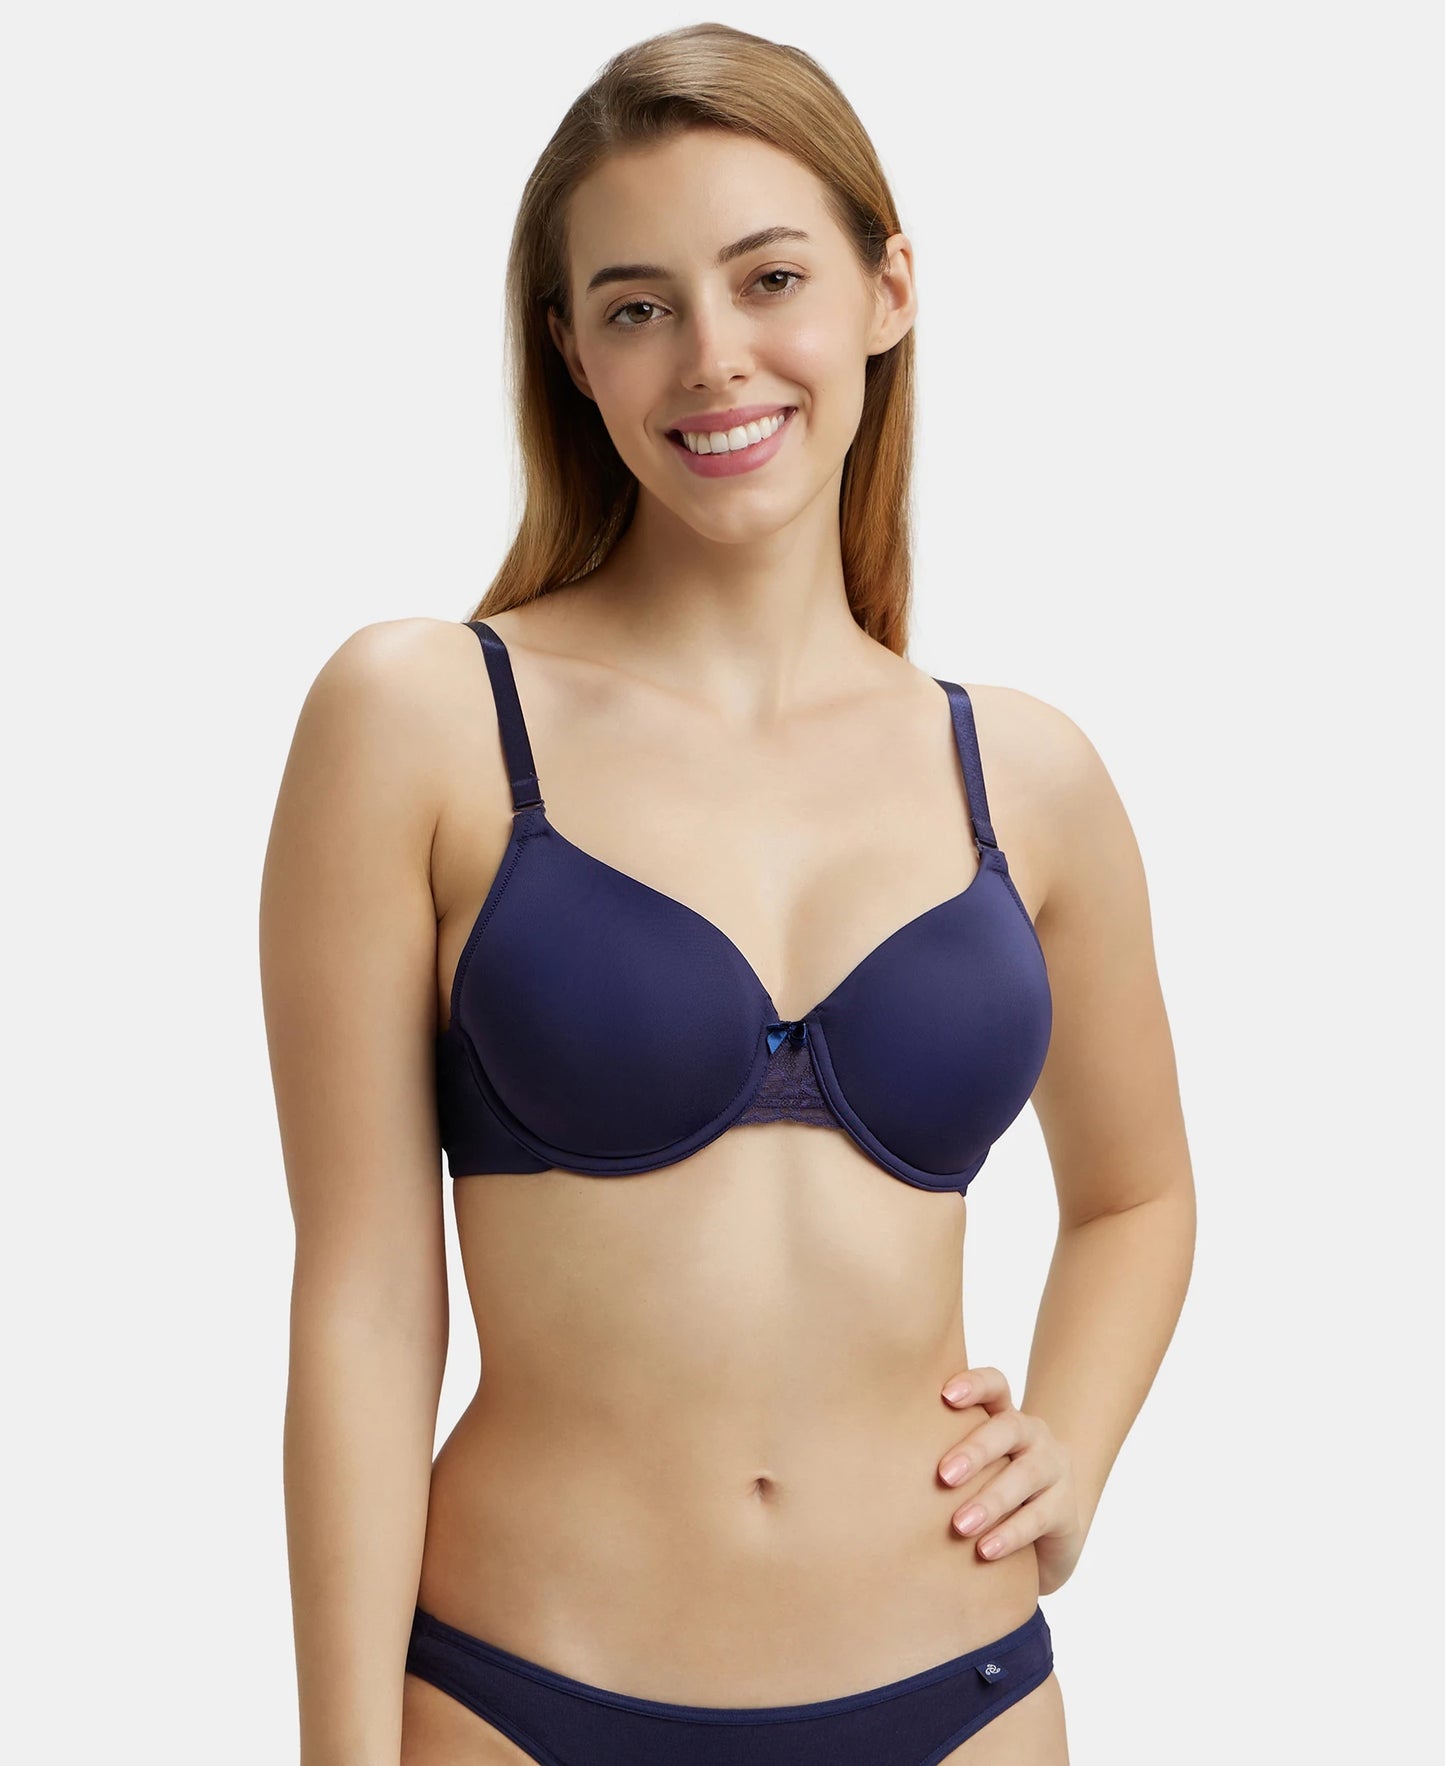 Under-Wired Padded Soft Touch Microfiber Elastane Full Coverage T-Shirt Bra with Lace Styling - Classic Navy-5